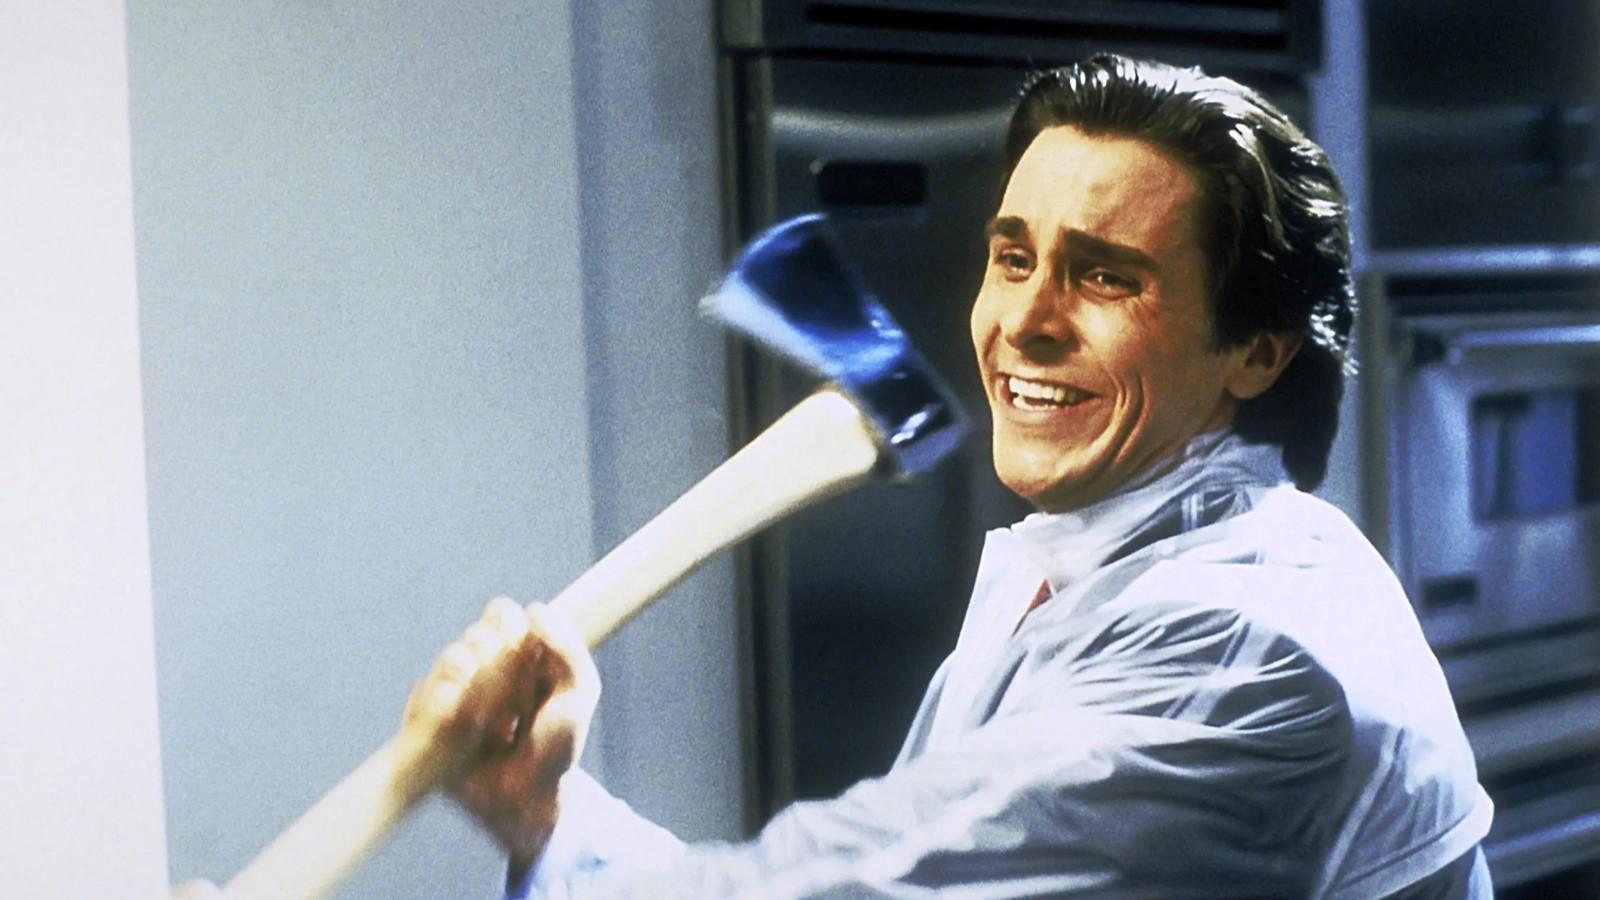 Christian Bale as Patrick Bateman in American Pyscho, wearing a raincoat and holding an axe